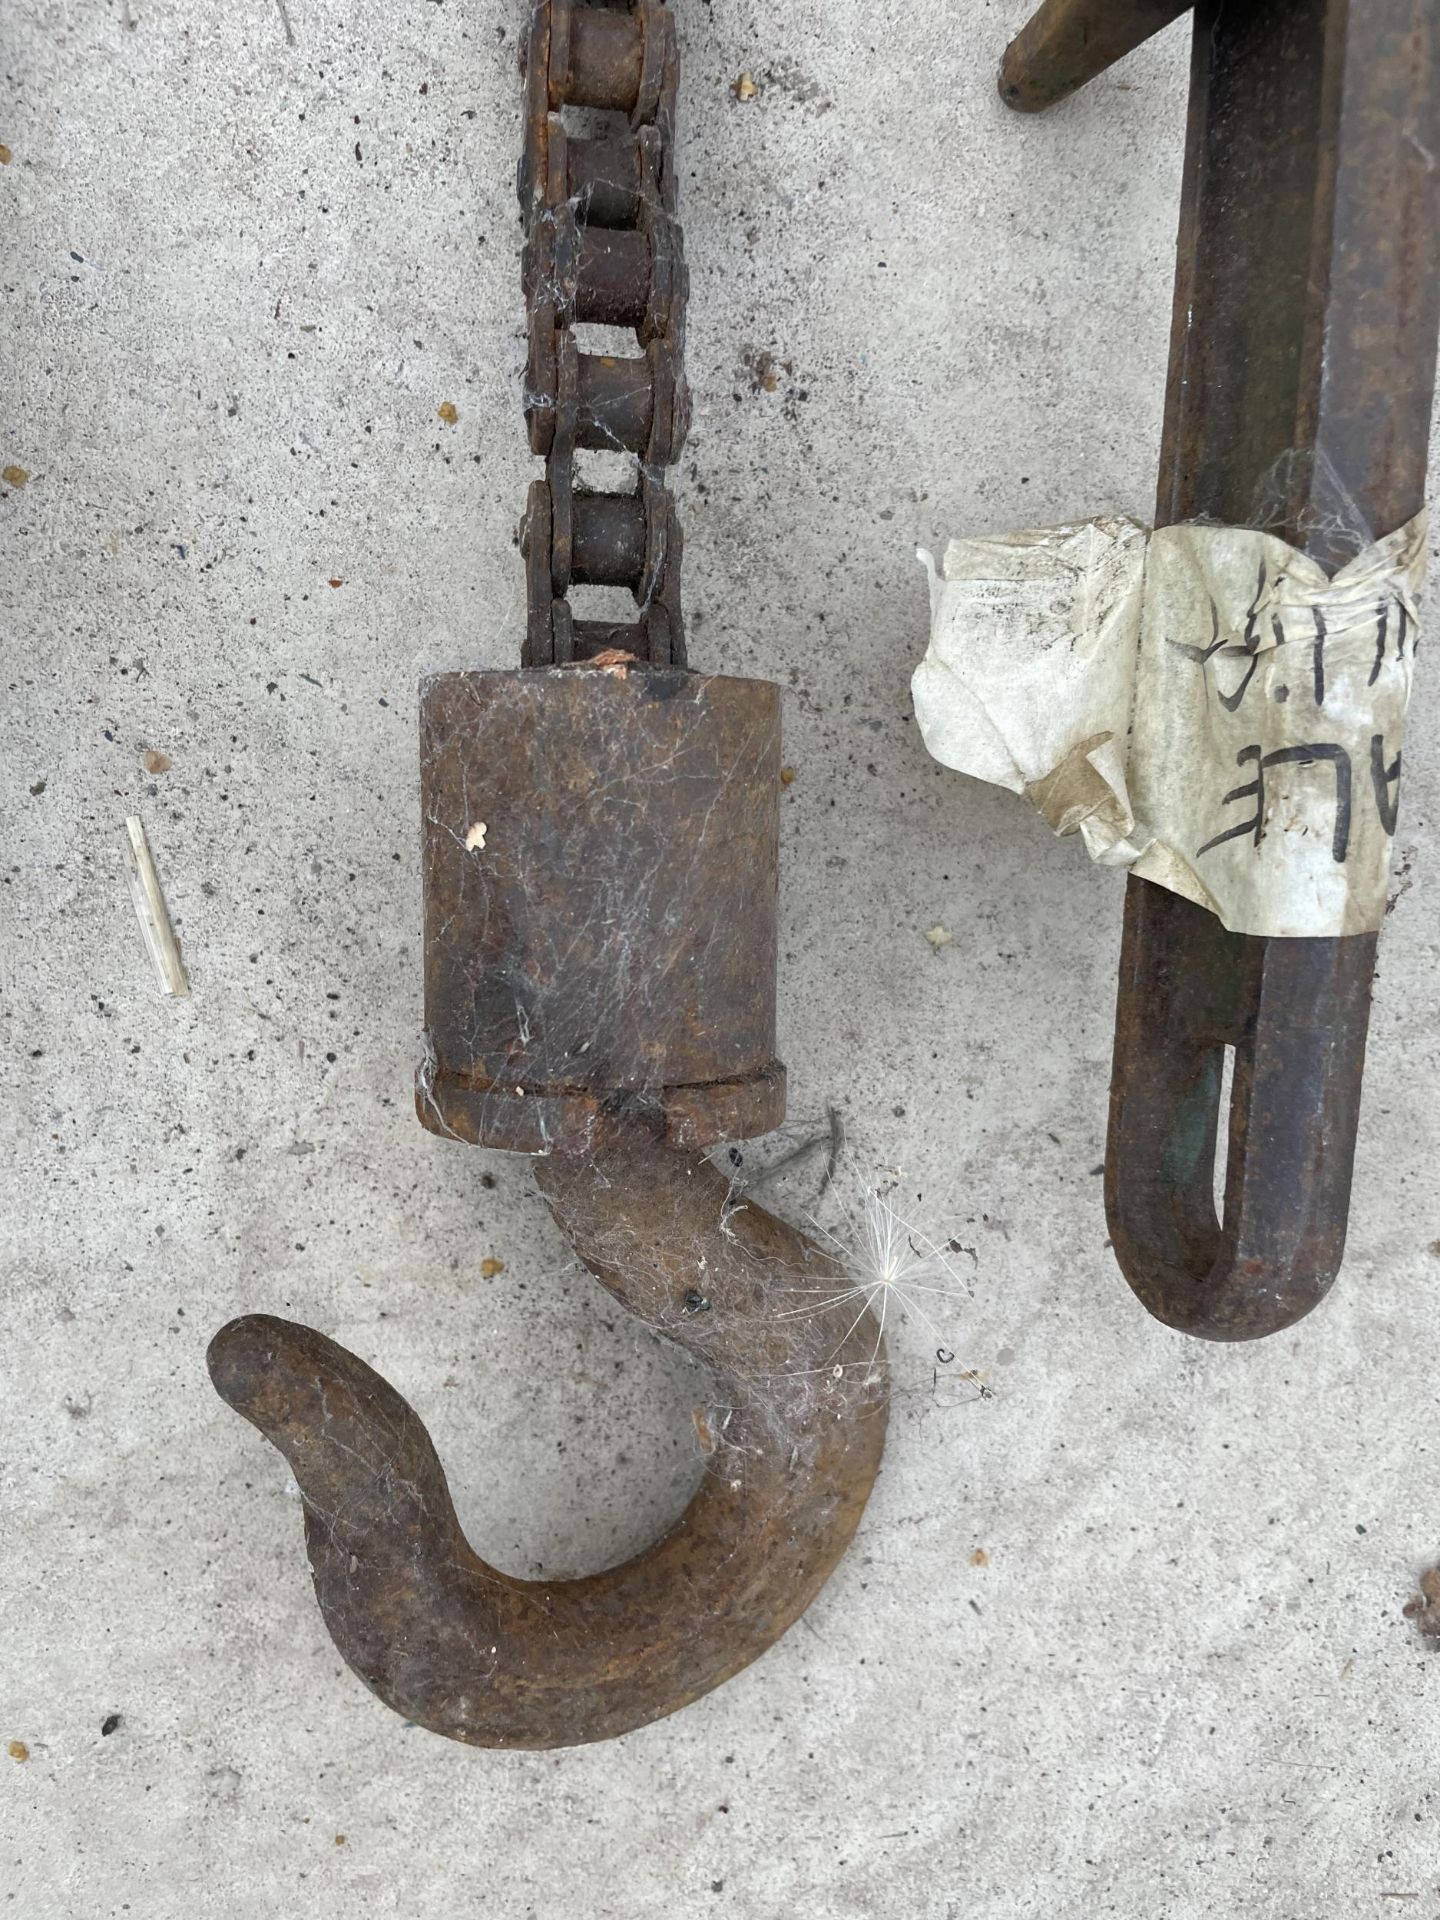 A LARGE VINTAGE SASH CLAMP AND A PULLEY SYSTEM - Image 2 of 3